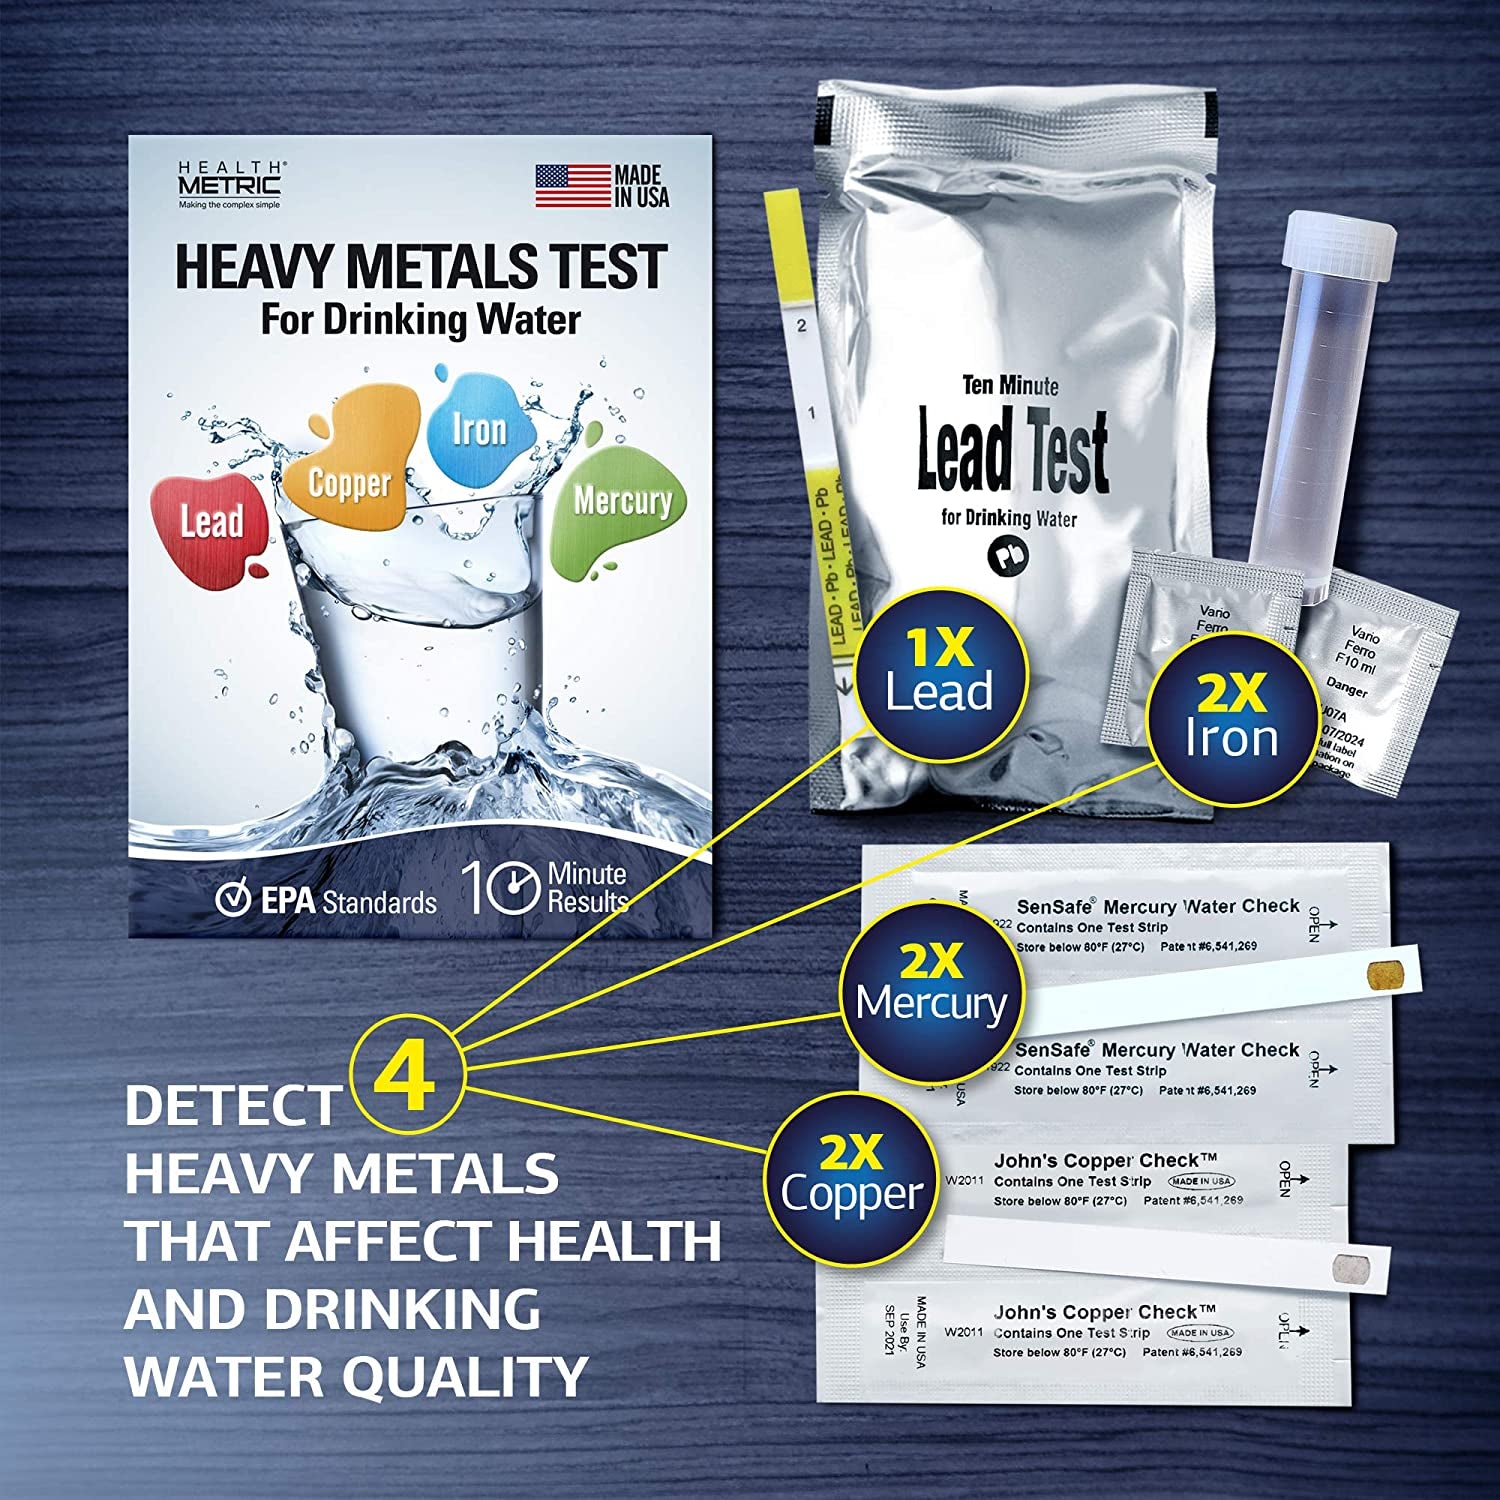 Health Metric, Lead Iron Copper and Mercury - Home Water Test Kit for Well Tap and Drinking Water | Fast & Accurate Quality Testing to EPA Standards | Easy to Use and Sensitive Tester Strips Made in USA